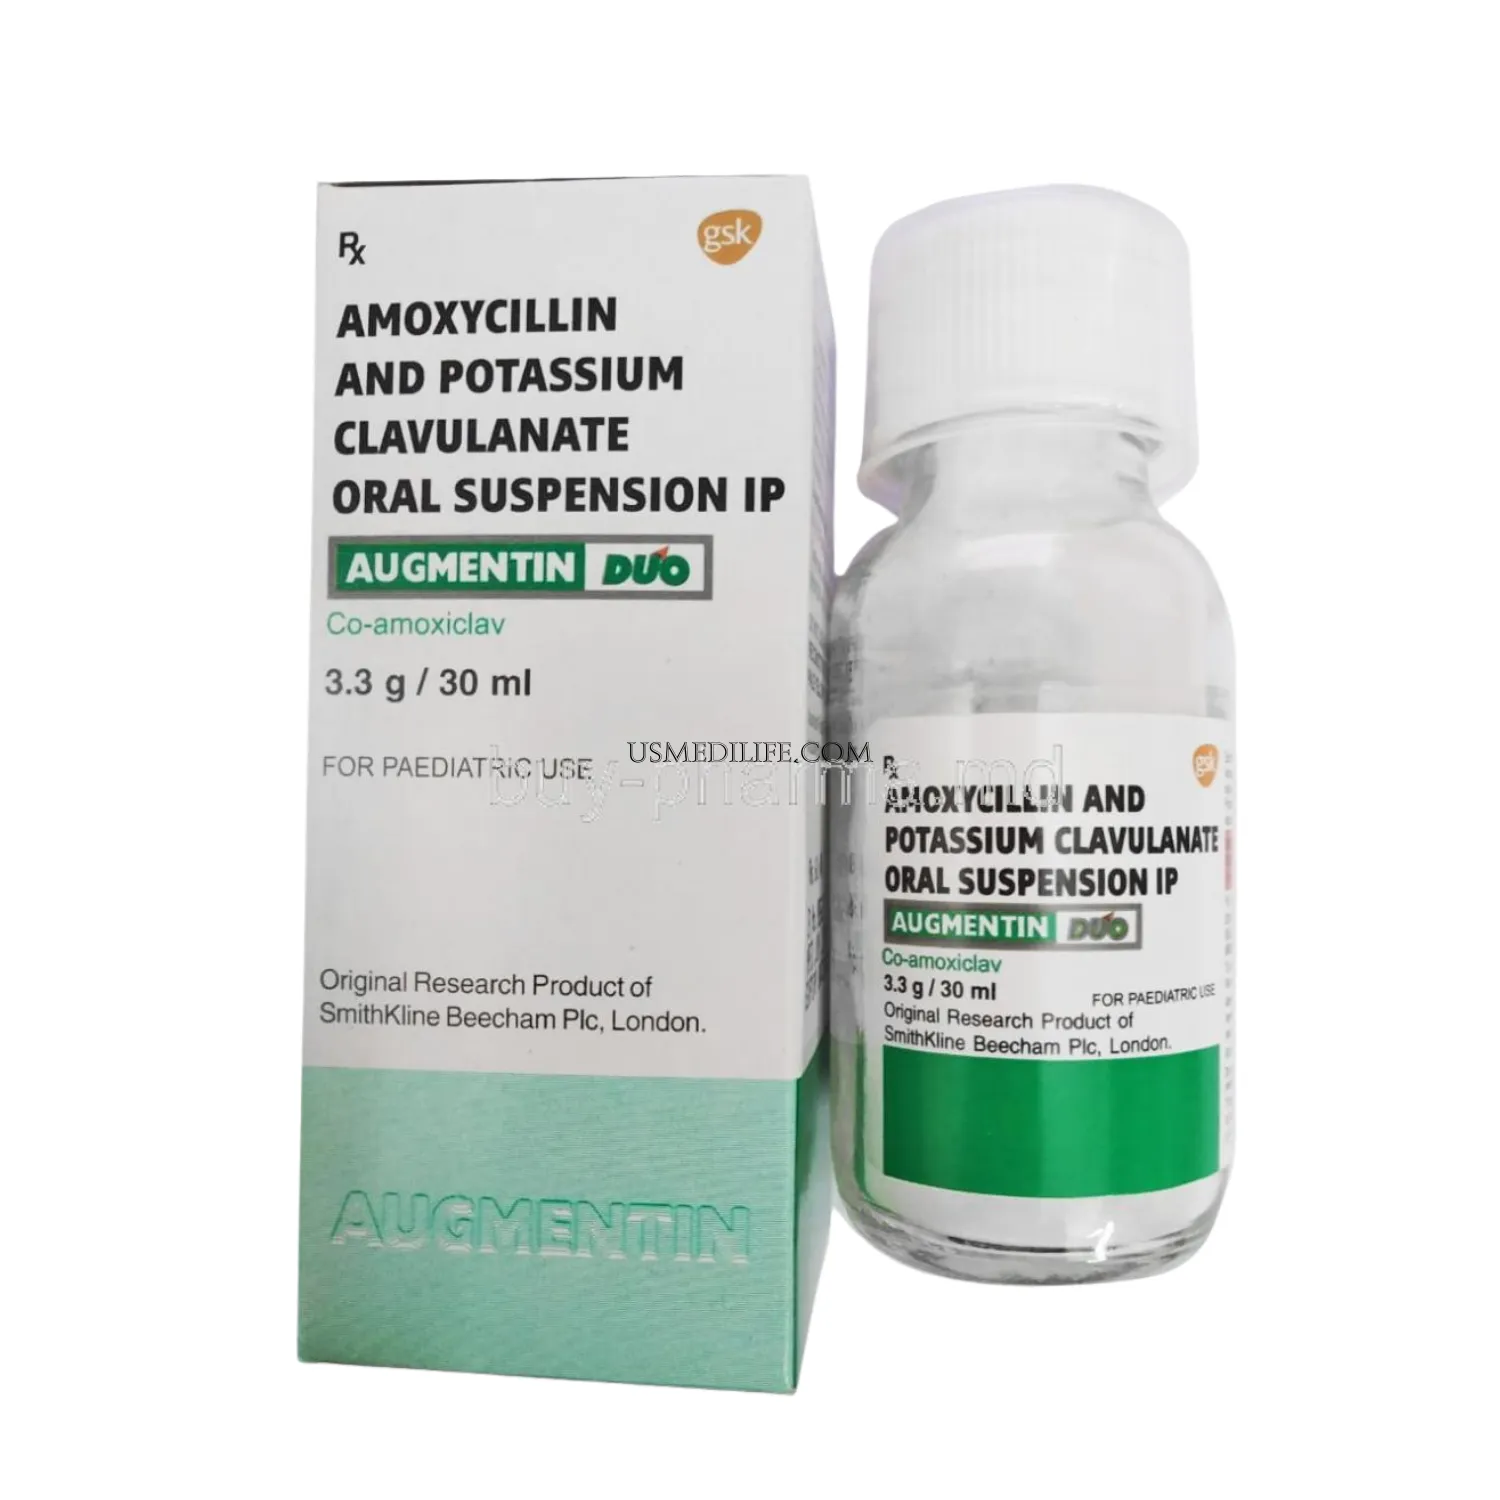 Augmentin Dry Syrup 30 ml Image